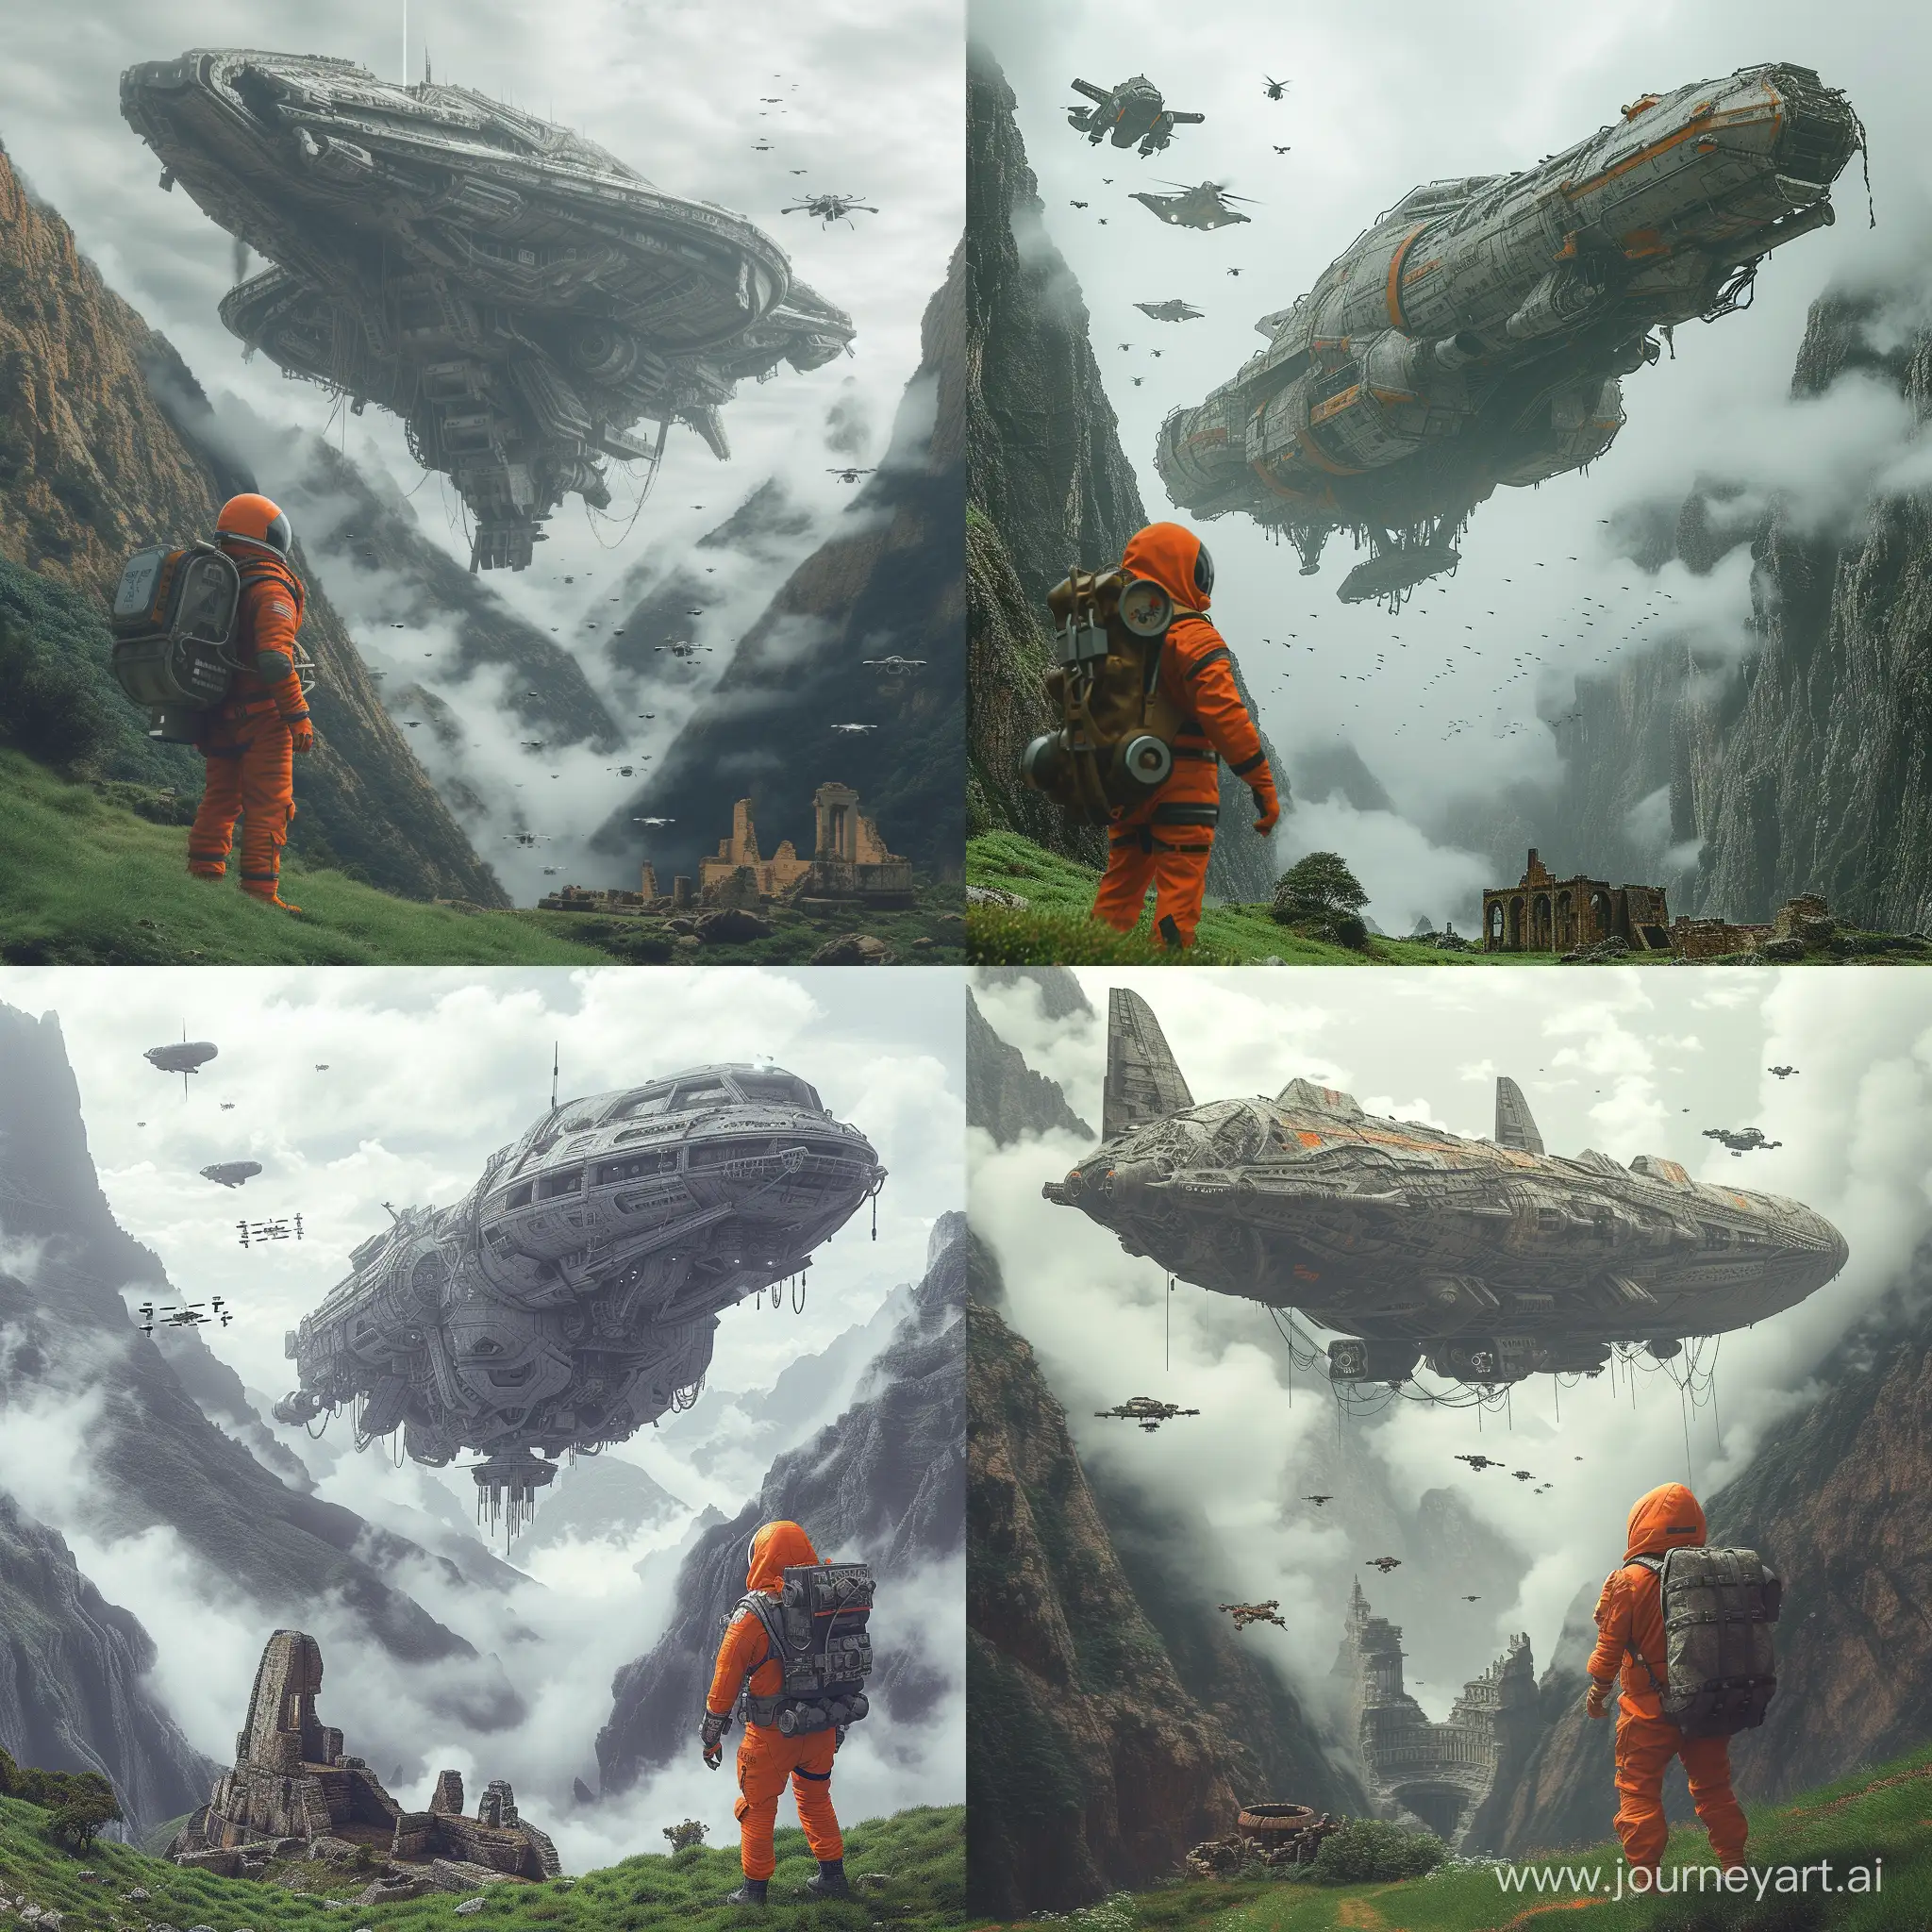 enveloped by clouds, a person in an orange spacesuit with a hood and equipped with a large backpack is standing on the grassy ground, observing the scene before them, a massive spaceship, detailed and worn, hovers above a deep chasm amidst the mountains, it appears to be landing or taking off, the spaceship has intricate designs and shows signs of wear and tear, indicating it has been used extensively, smaller flying objects are visible near the larger ship, possibly drones or smaller spacecrafts, ruins of an old structure are visible on the edge of the chasm below the hovering ship, they appear ancient and abandoned, the atmosphere is misty with clouds weaving through the mountains creating a mysterious ambiance, with added historical landmarks and historical landmarks and historical landmarks